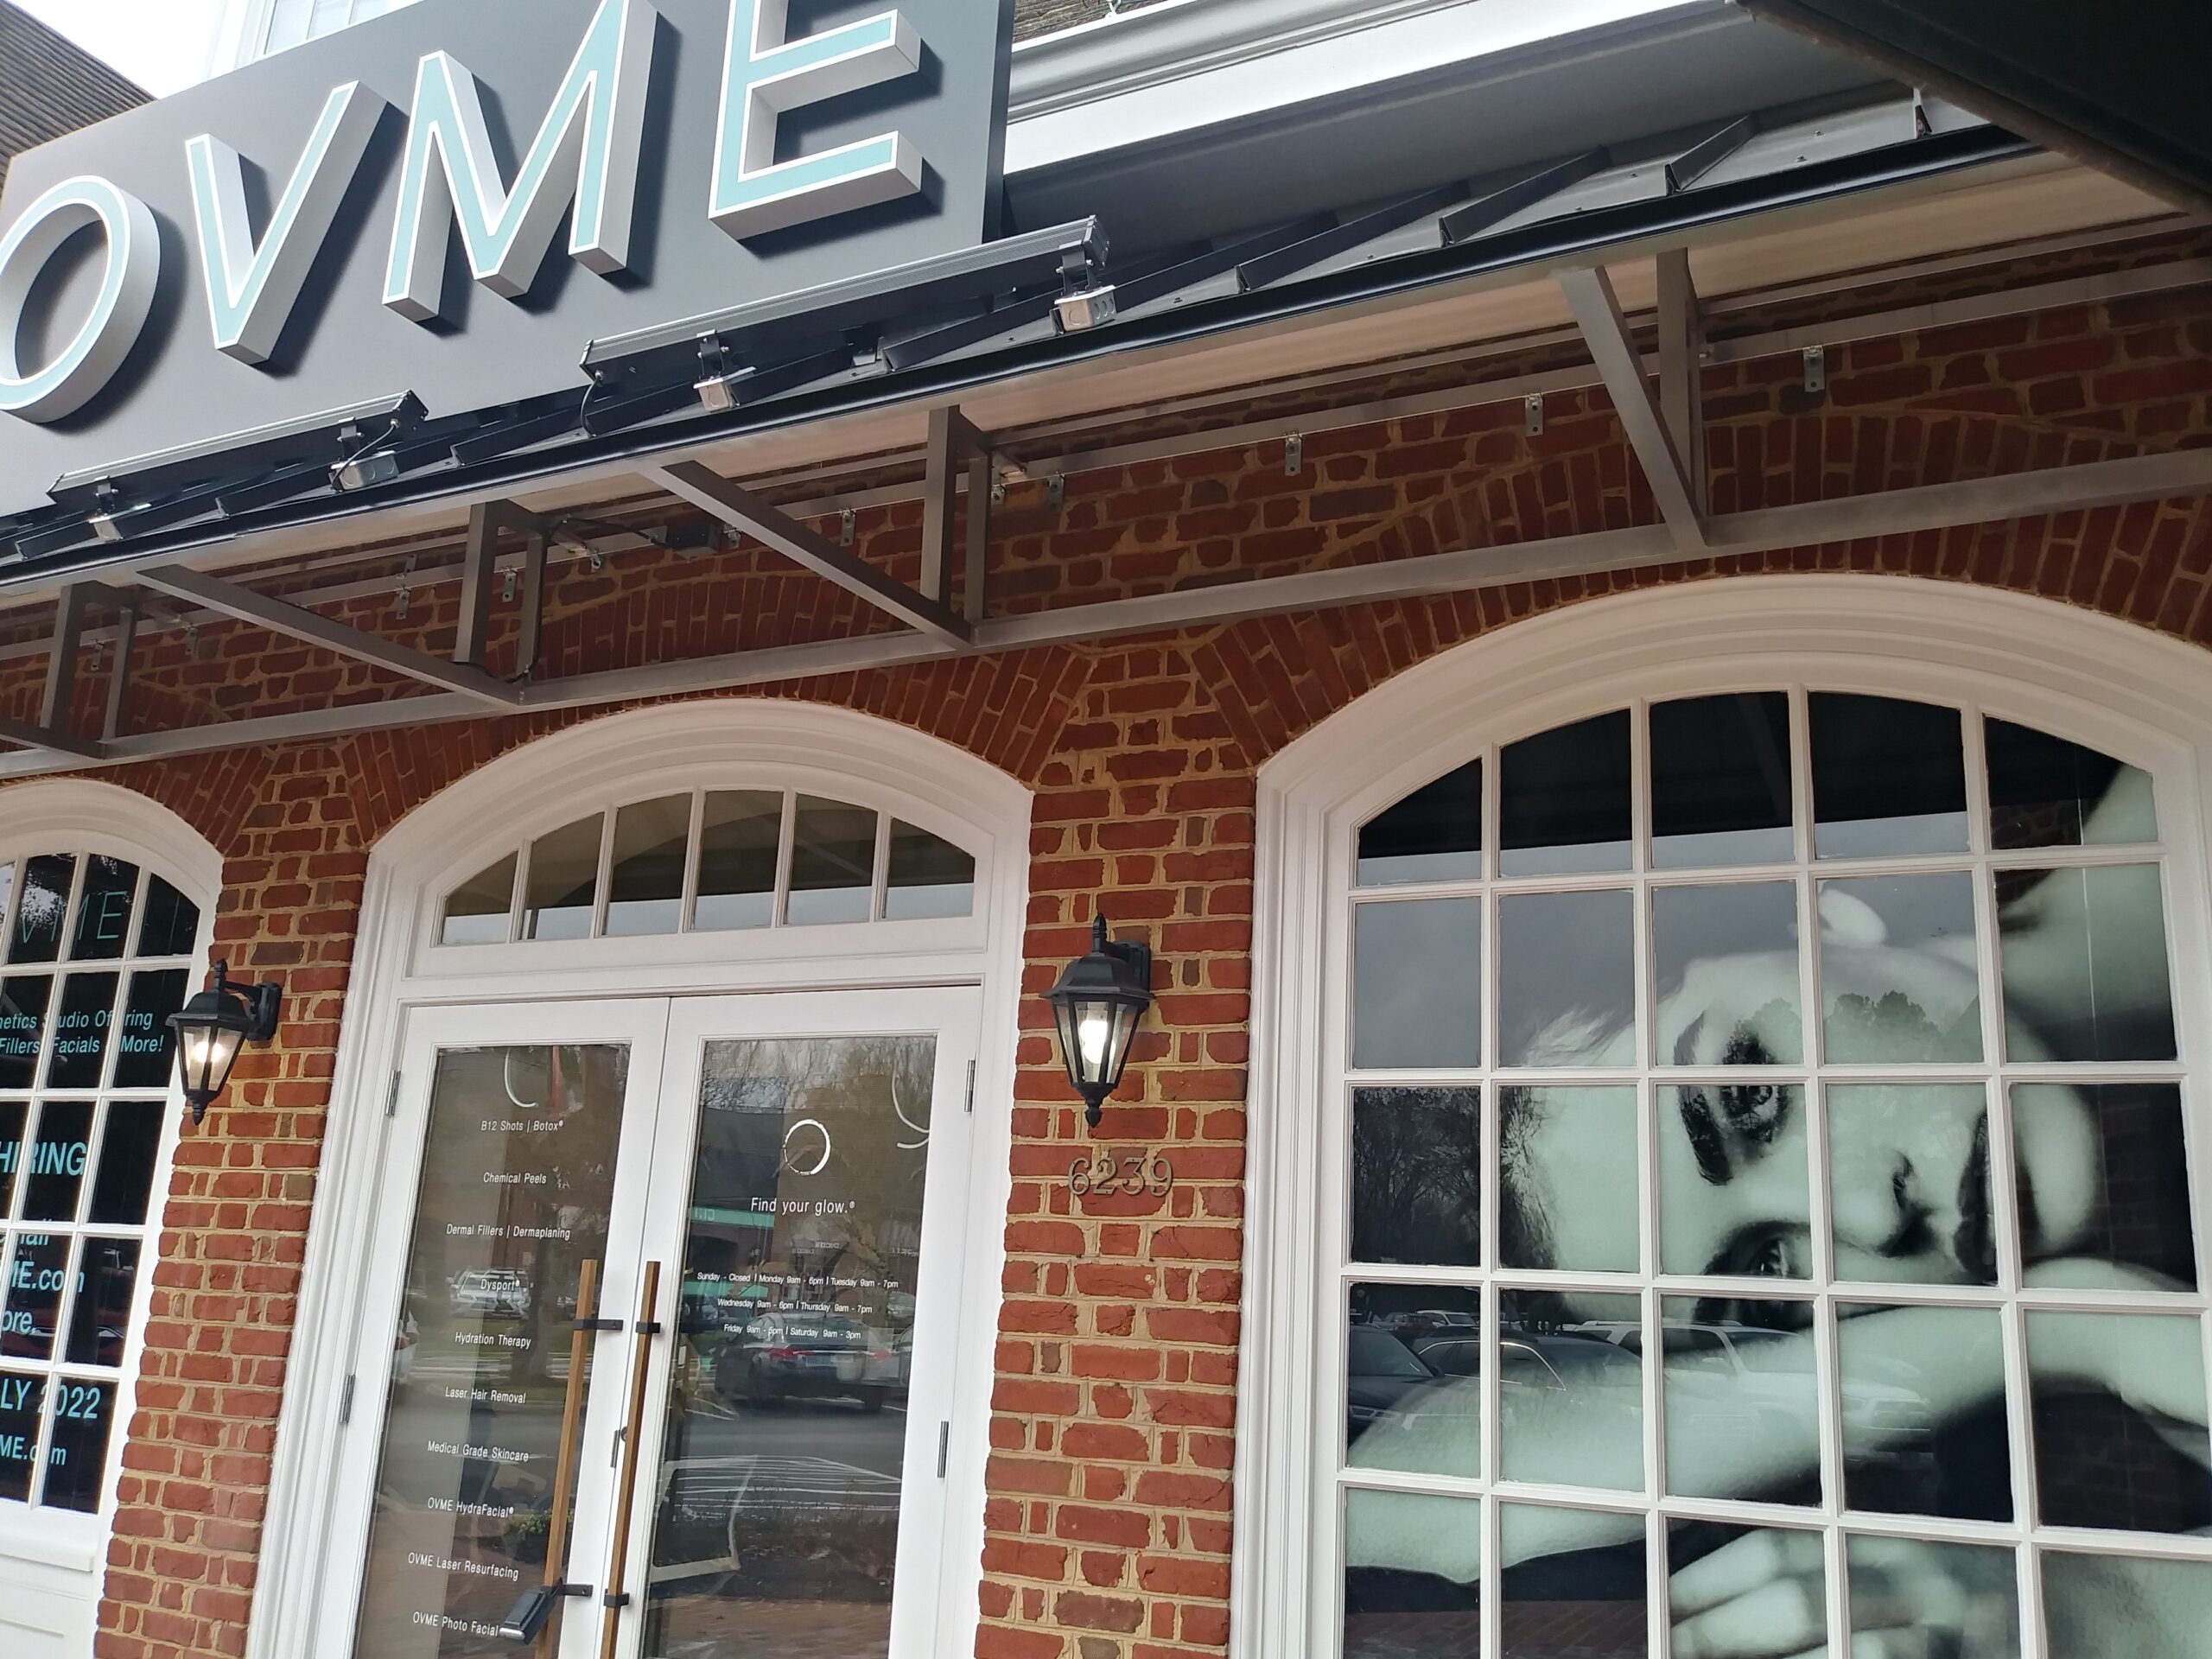 Ovme opening cosmetic surgery studio in Richmond